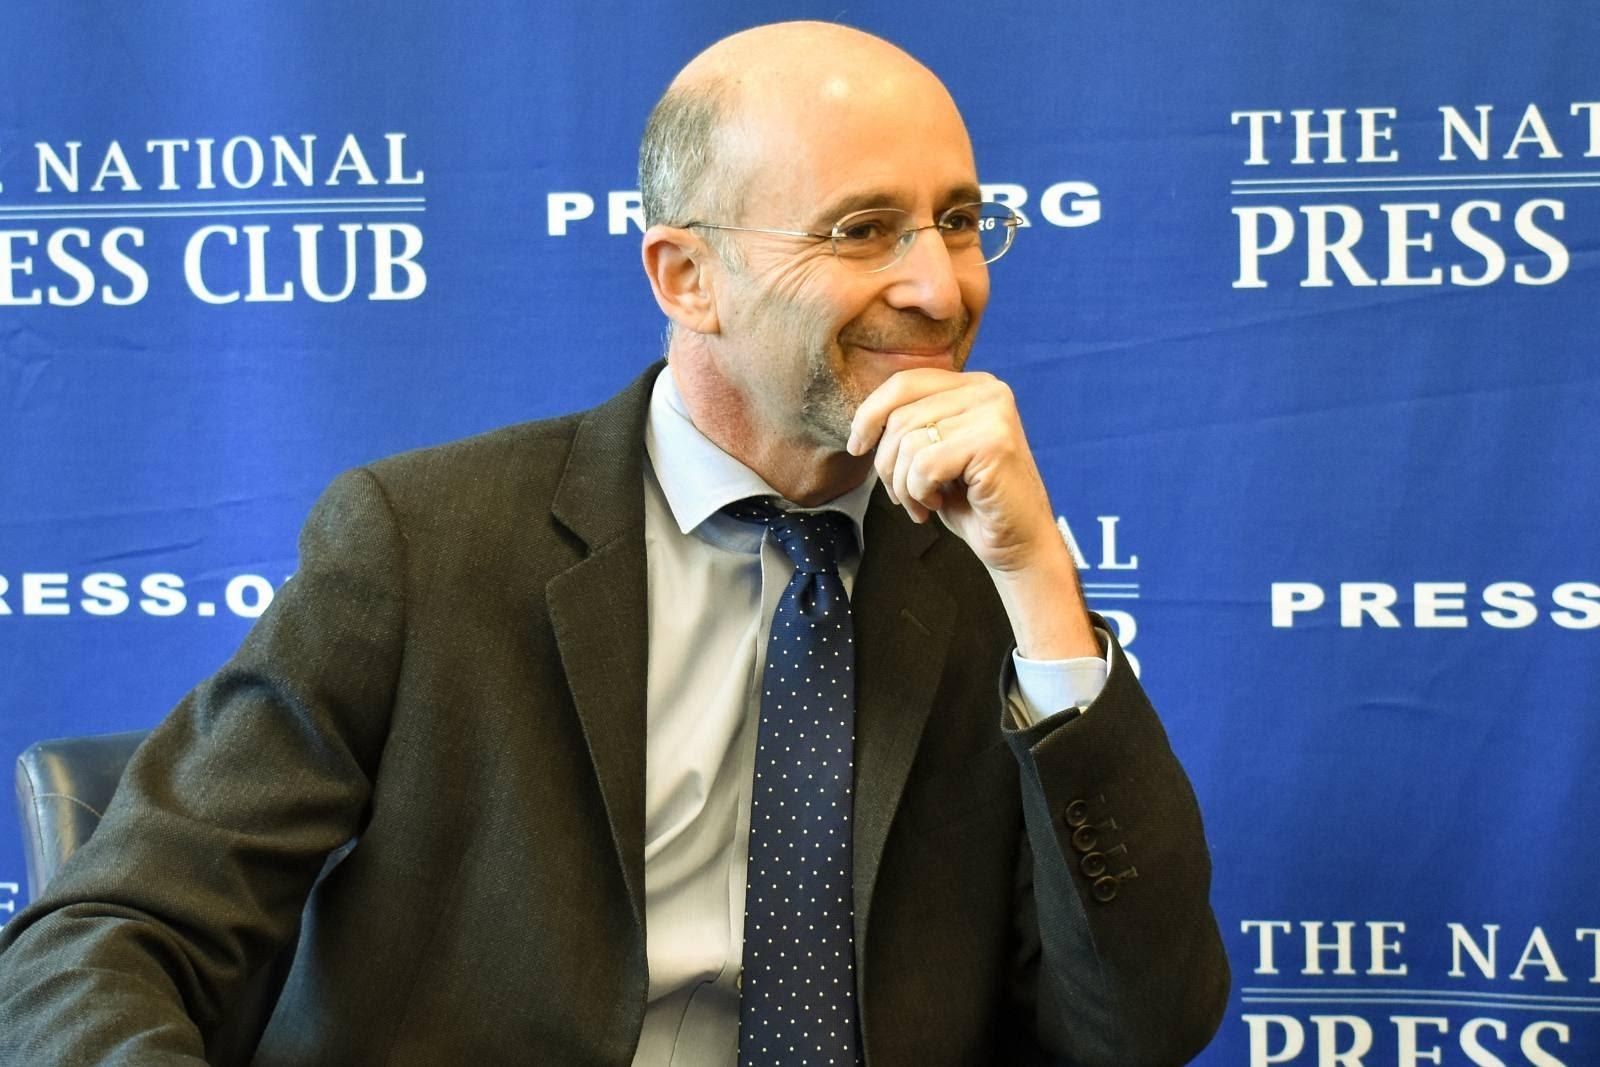 Malley’s Middle East foreign policy expertise and diplomatic skills make him the ideal candidate to reinvigorate the JCPOA and help calm regional tensions. (Photo: National Press Club)